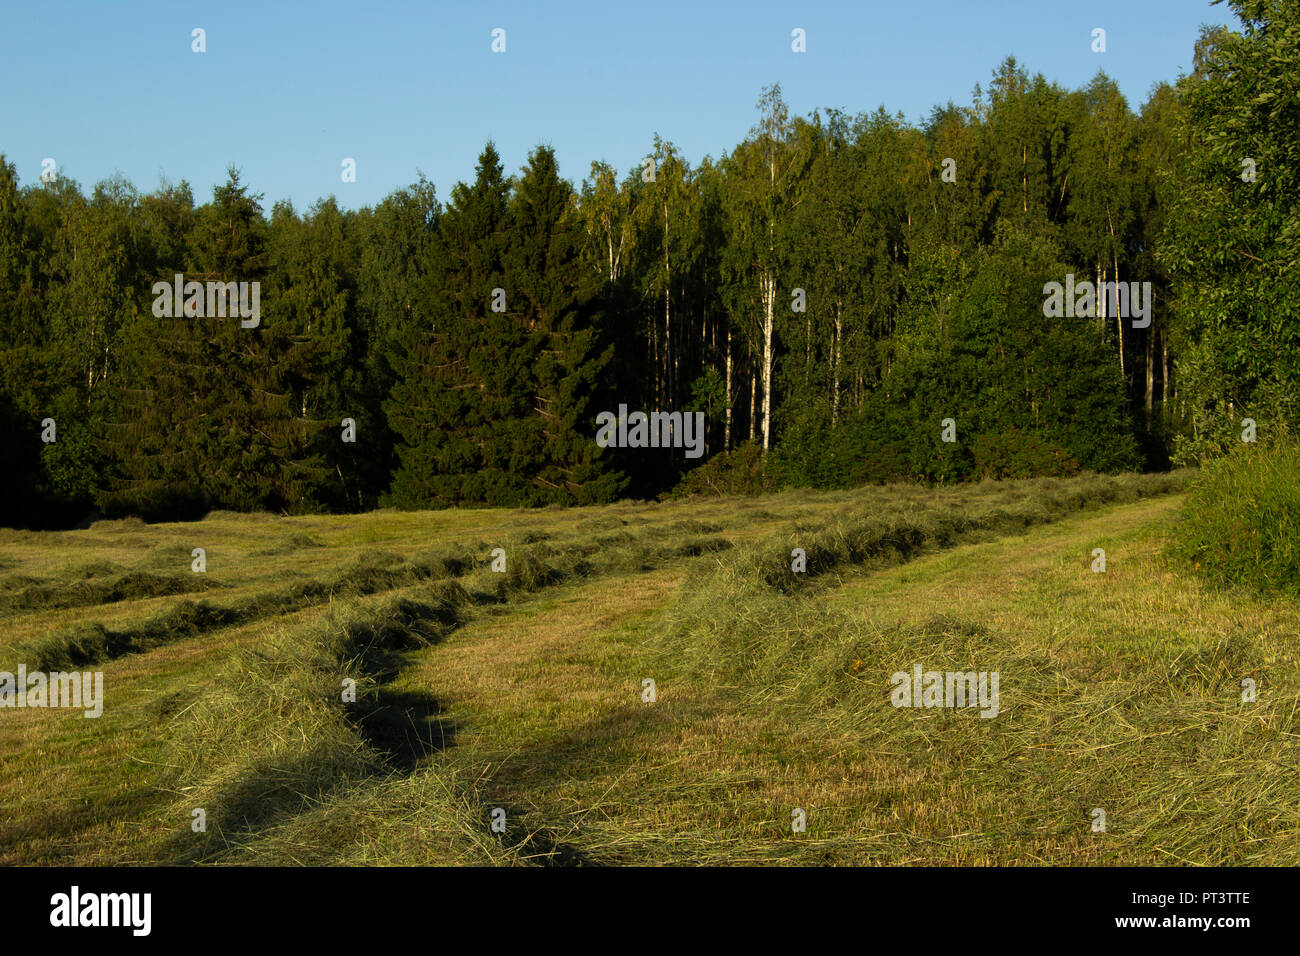 Rows of hay in a field, with fir trees and a blue sky in the background. Stock Photo